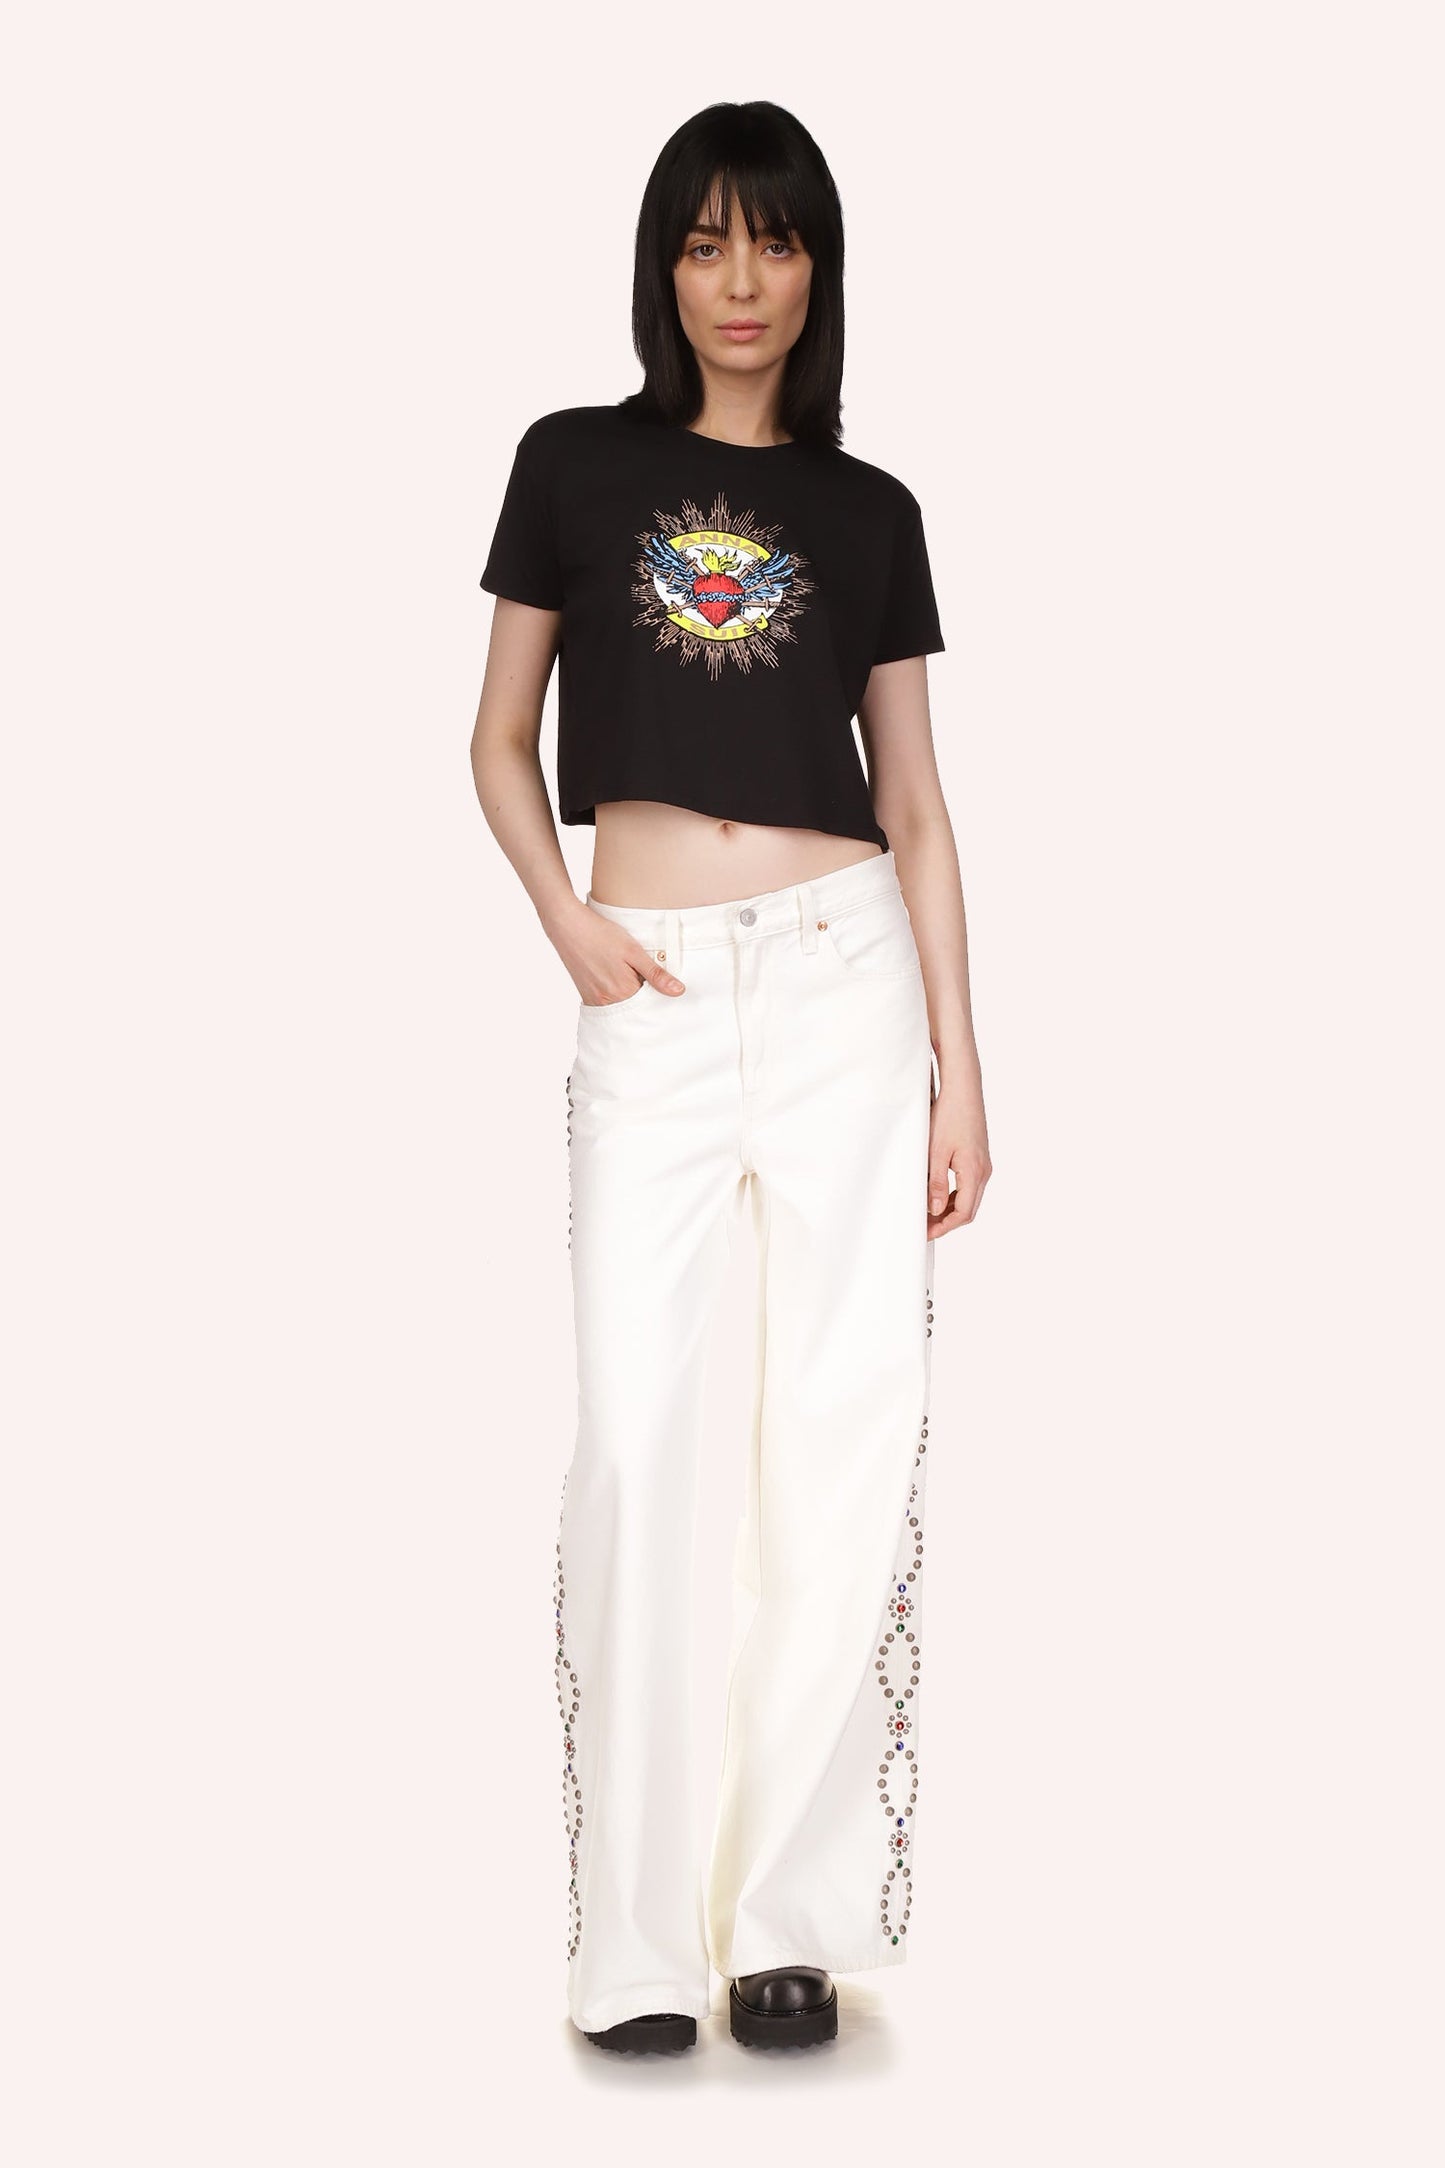 On a black background, Sacred Heart in the middle of the t-shirt, Anna Sui label in the print